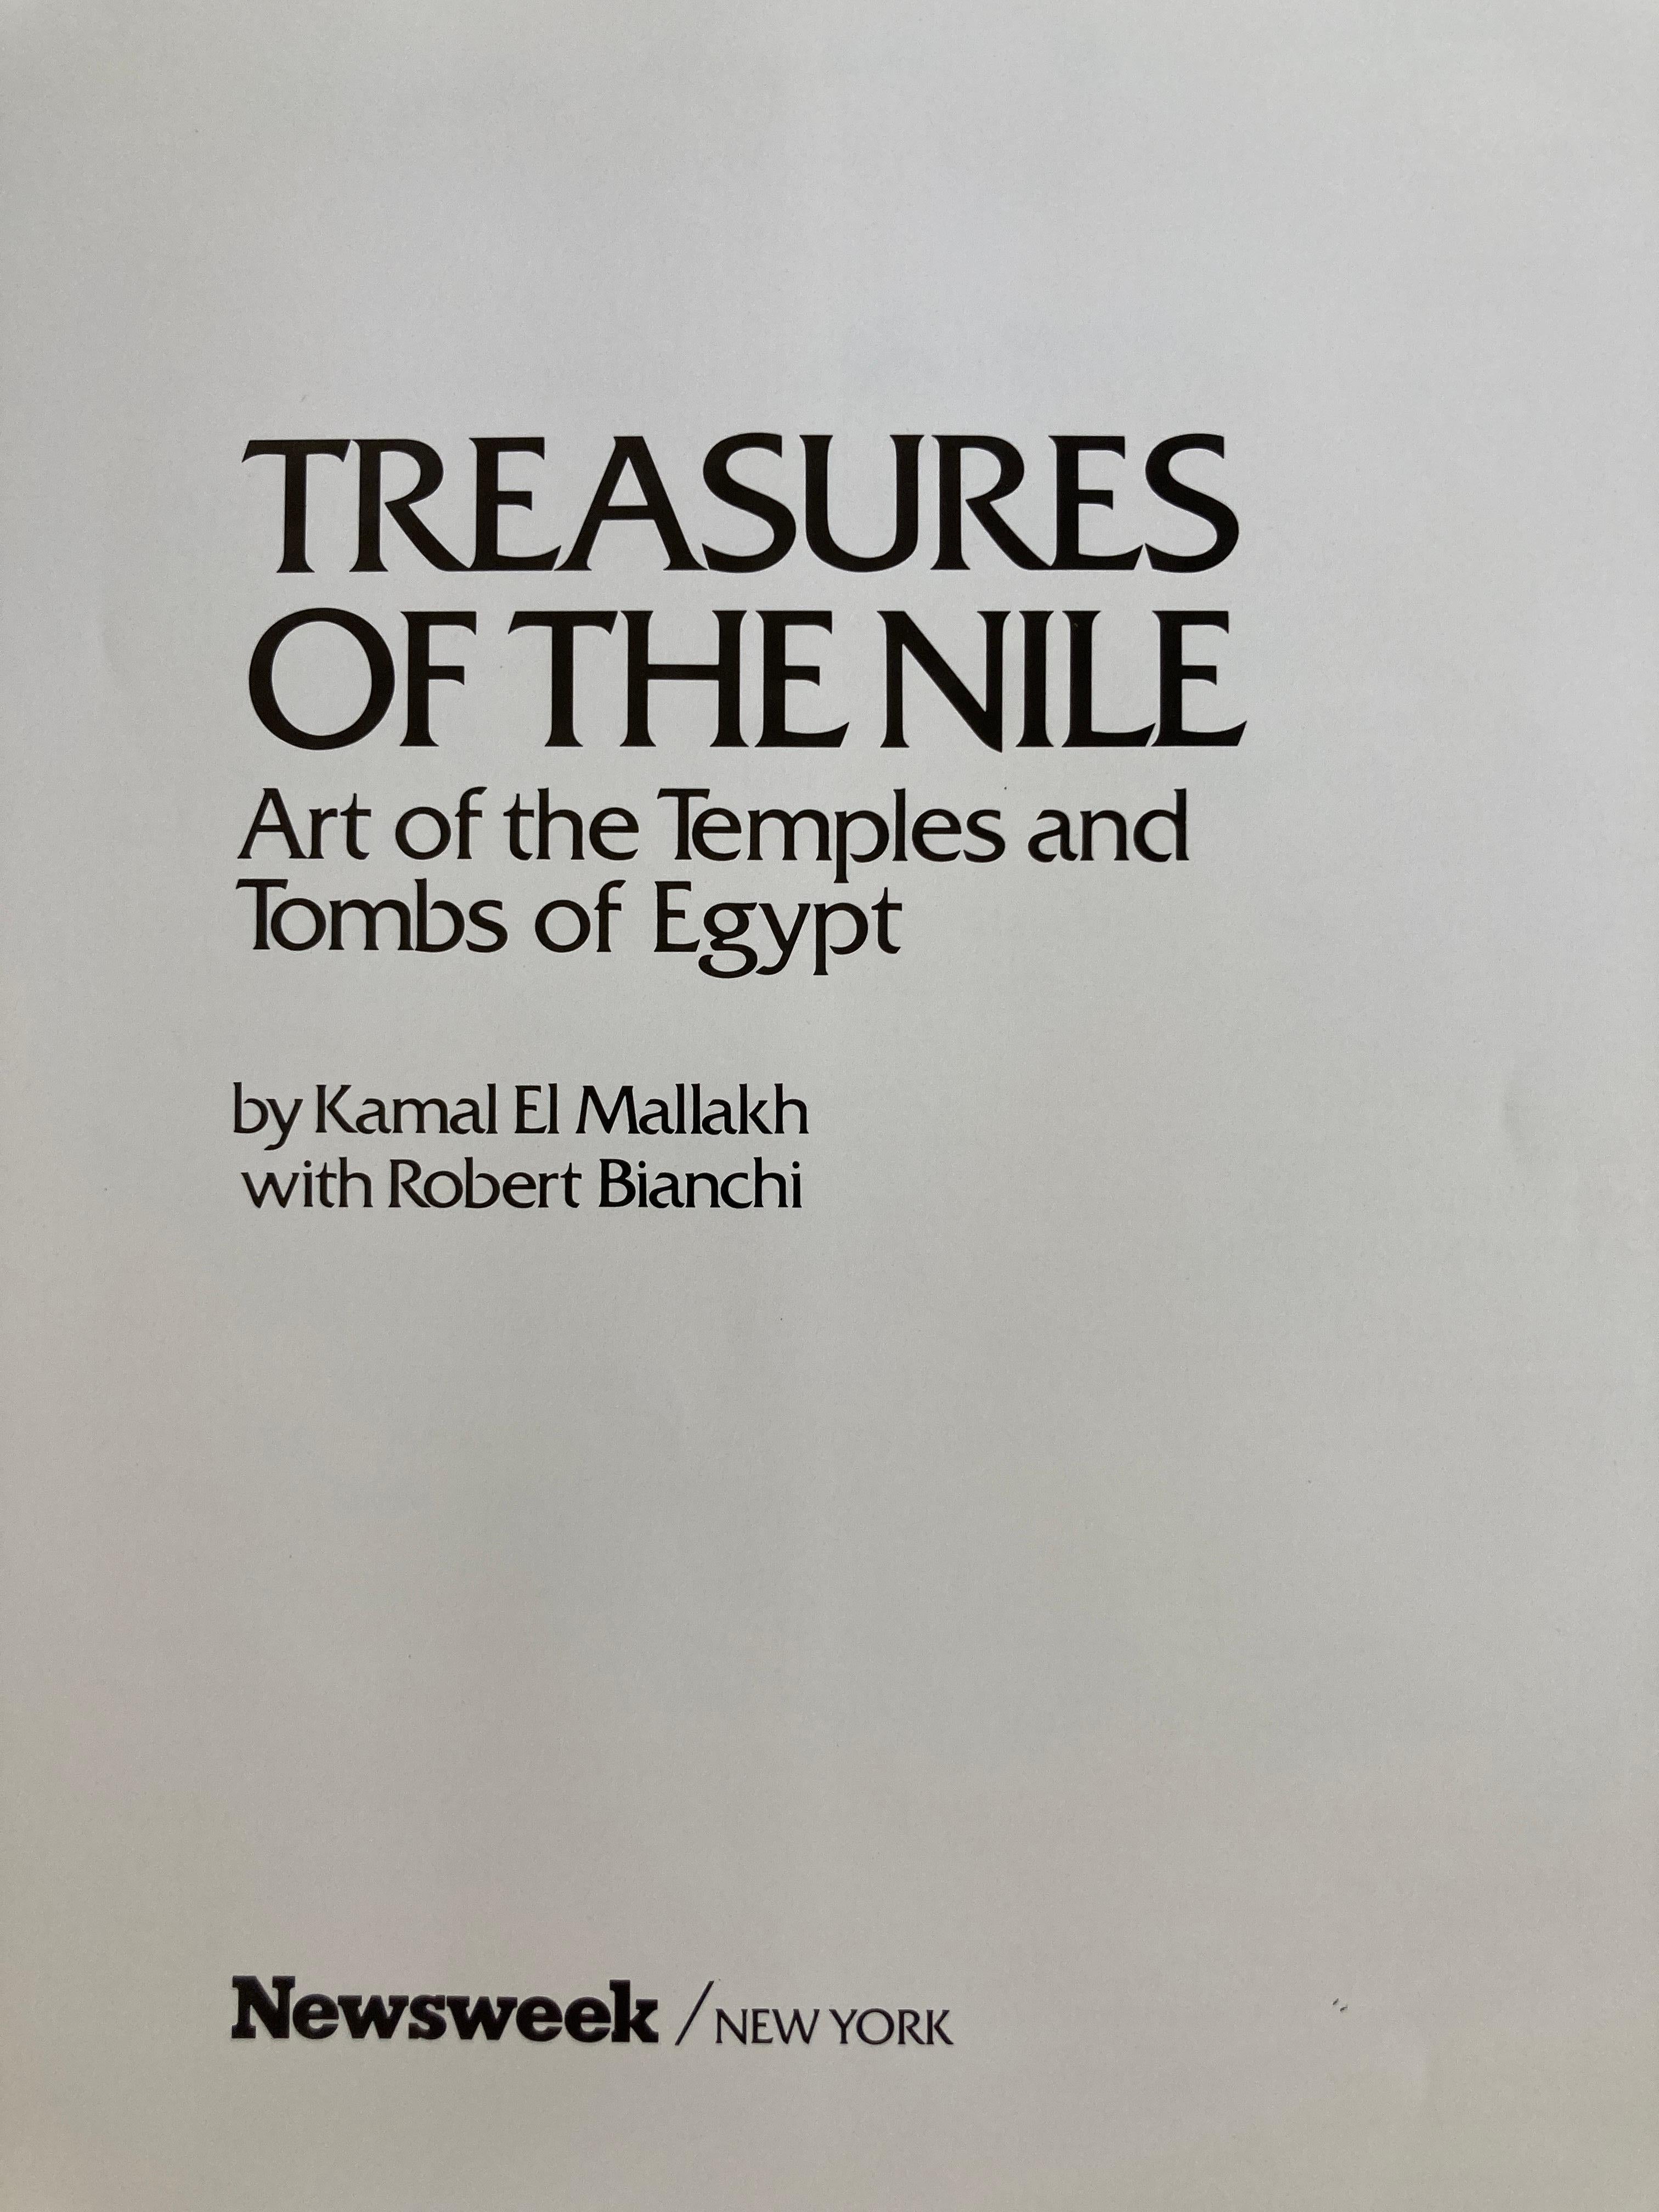 Treasures of the Nile: Art of the Temples and Tombs of Egypt Hardcover Book 6